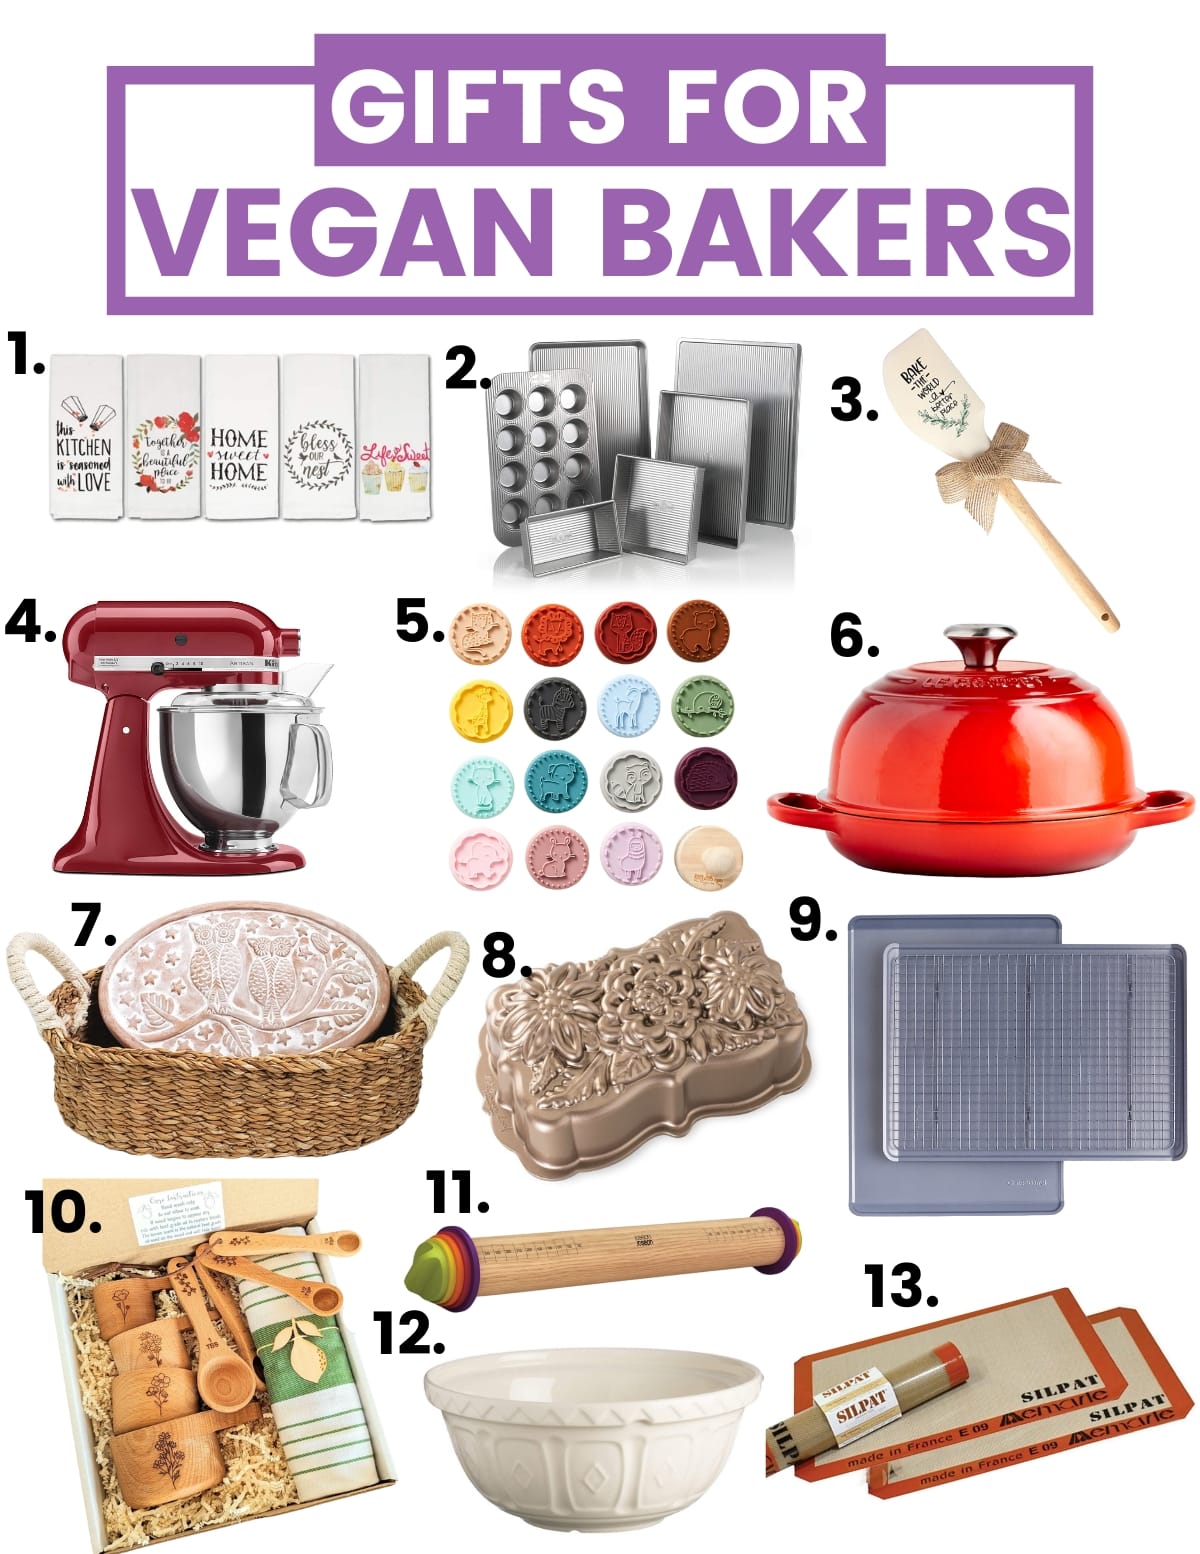 Gifts for vegan bakers